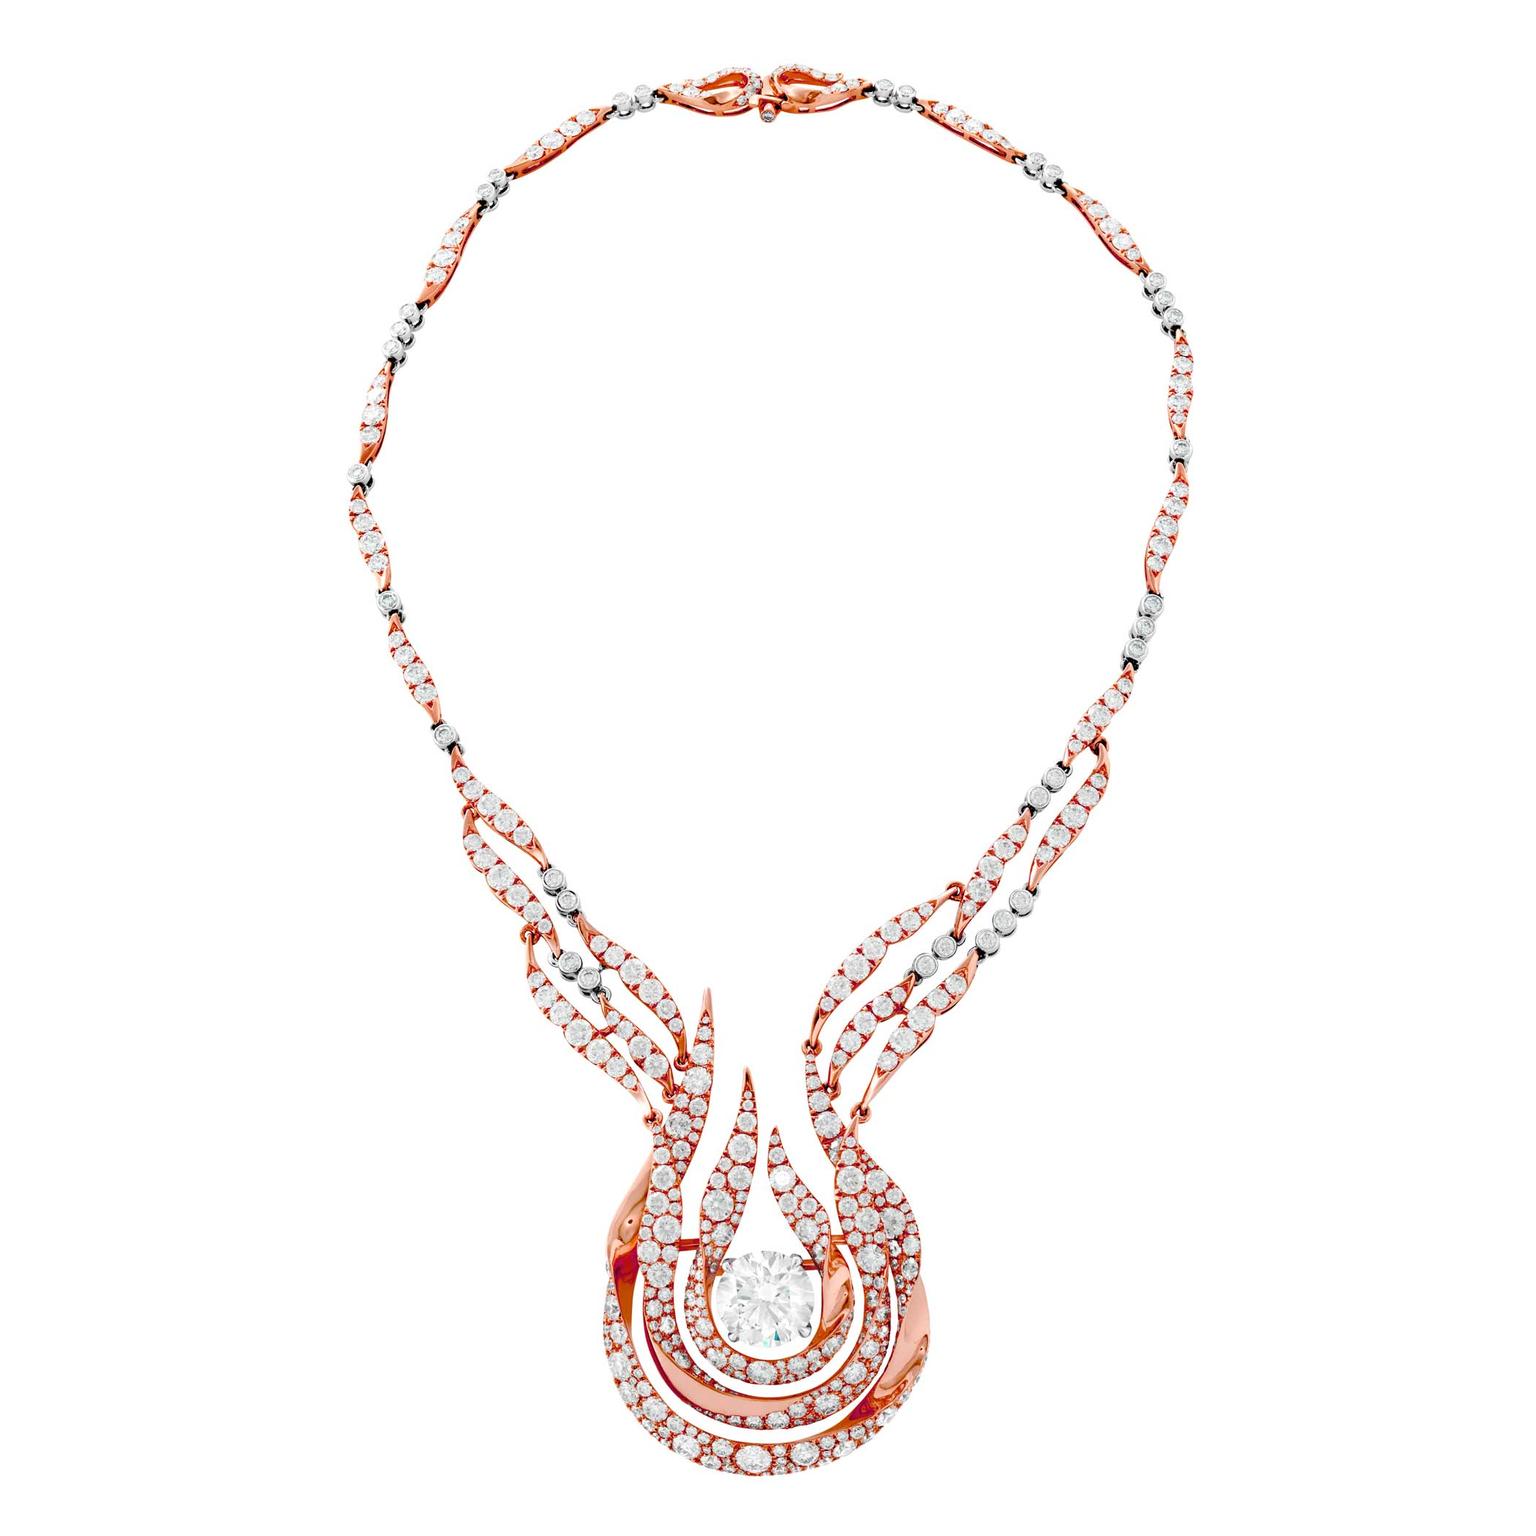 Hearts on Fire bagged itself a Couture Design Award in the Best in Haute Couture category for this striking diamond necklace in rose gold.